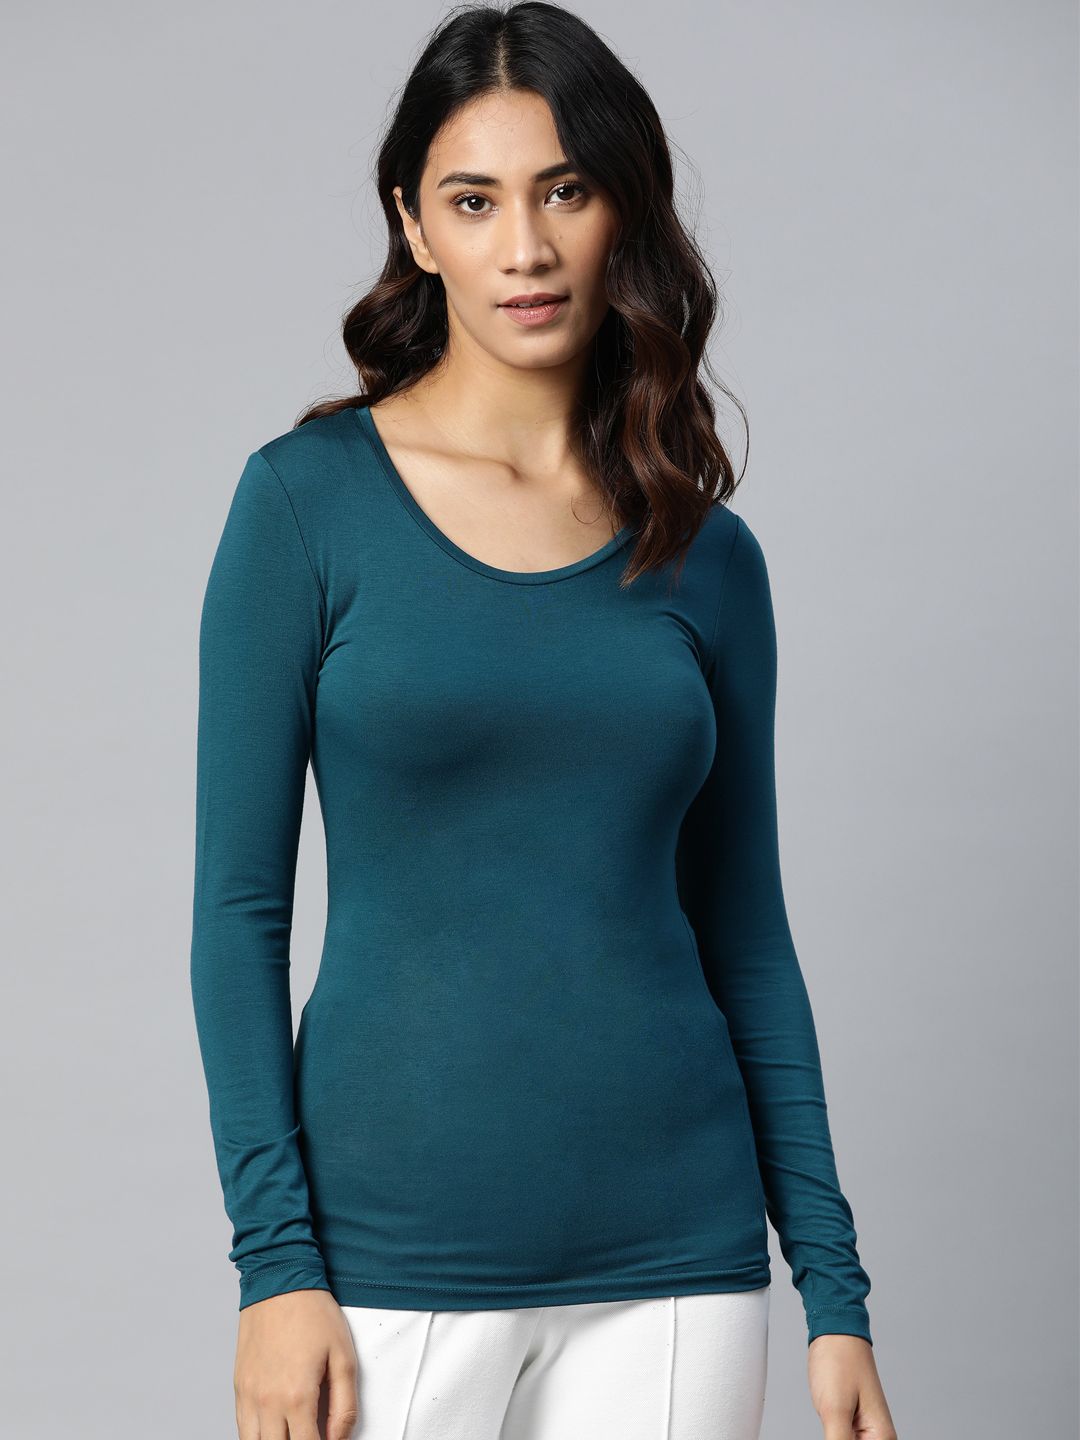 Marks & Spencer Women Teal Blue Solid Lounge T-Shirt Price in India